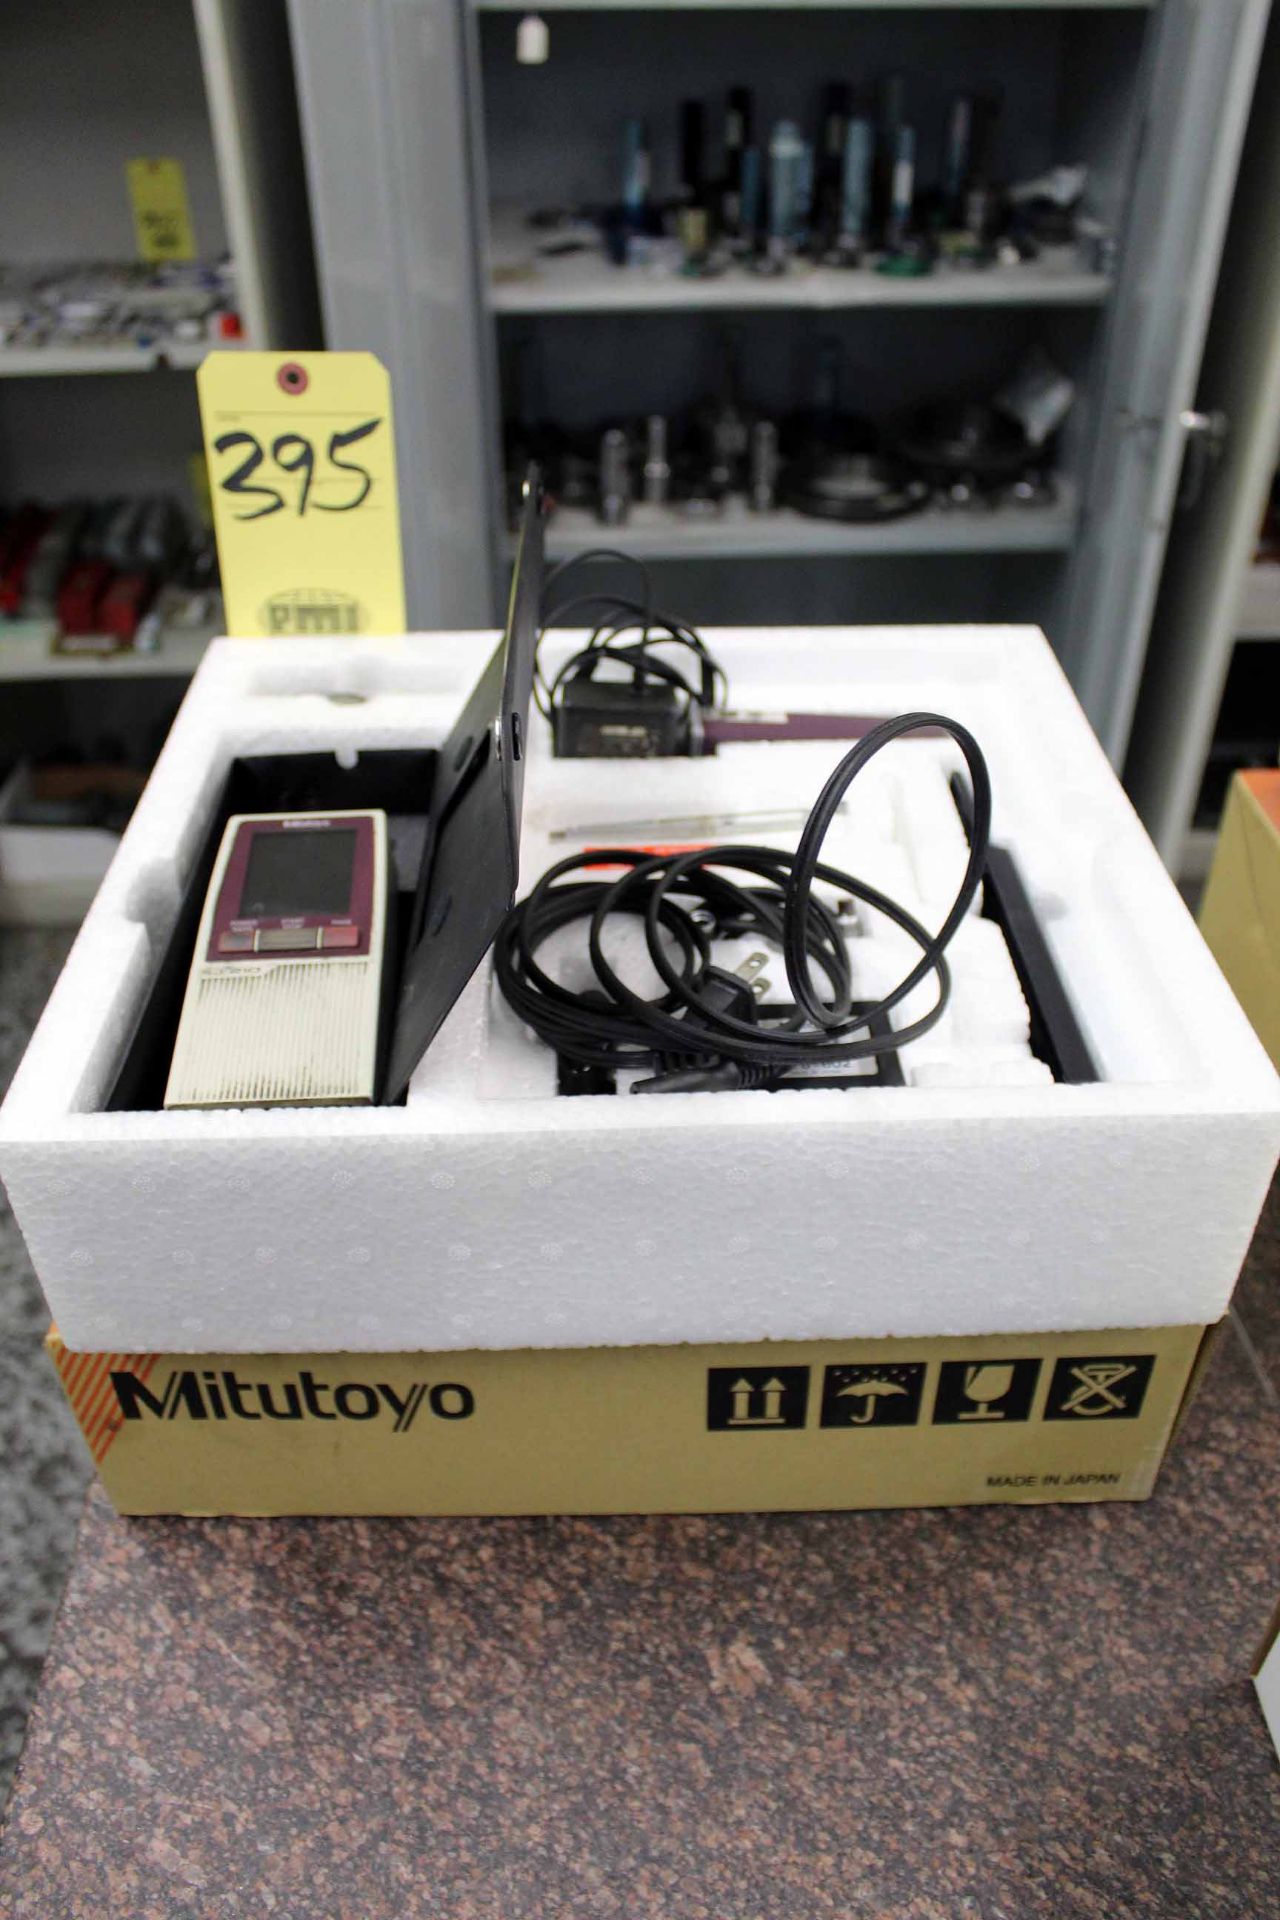 SURFACE ROUGHNESS TESTER, MITUTOYO, SJ-21., S/N 220021210